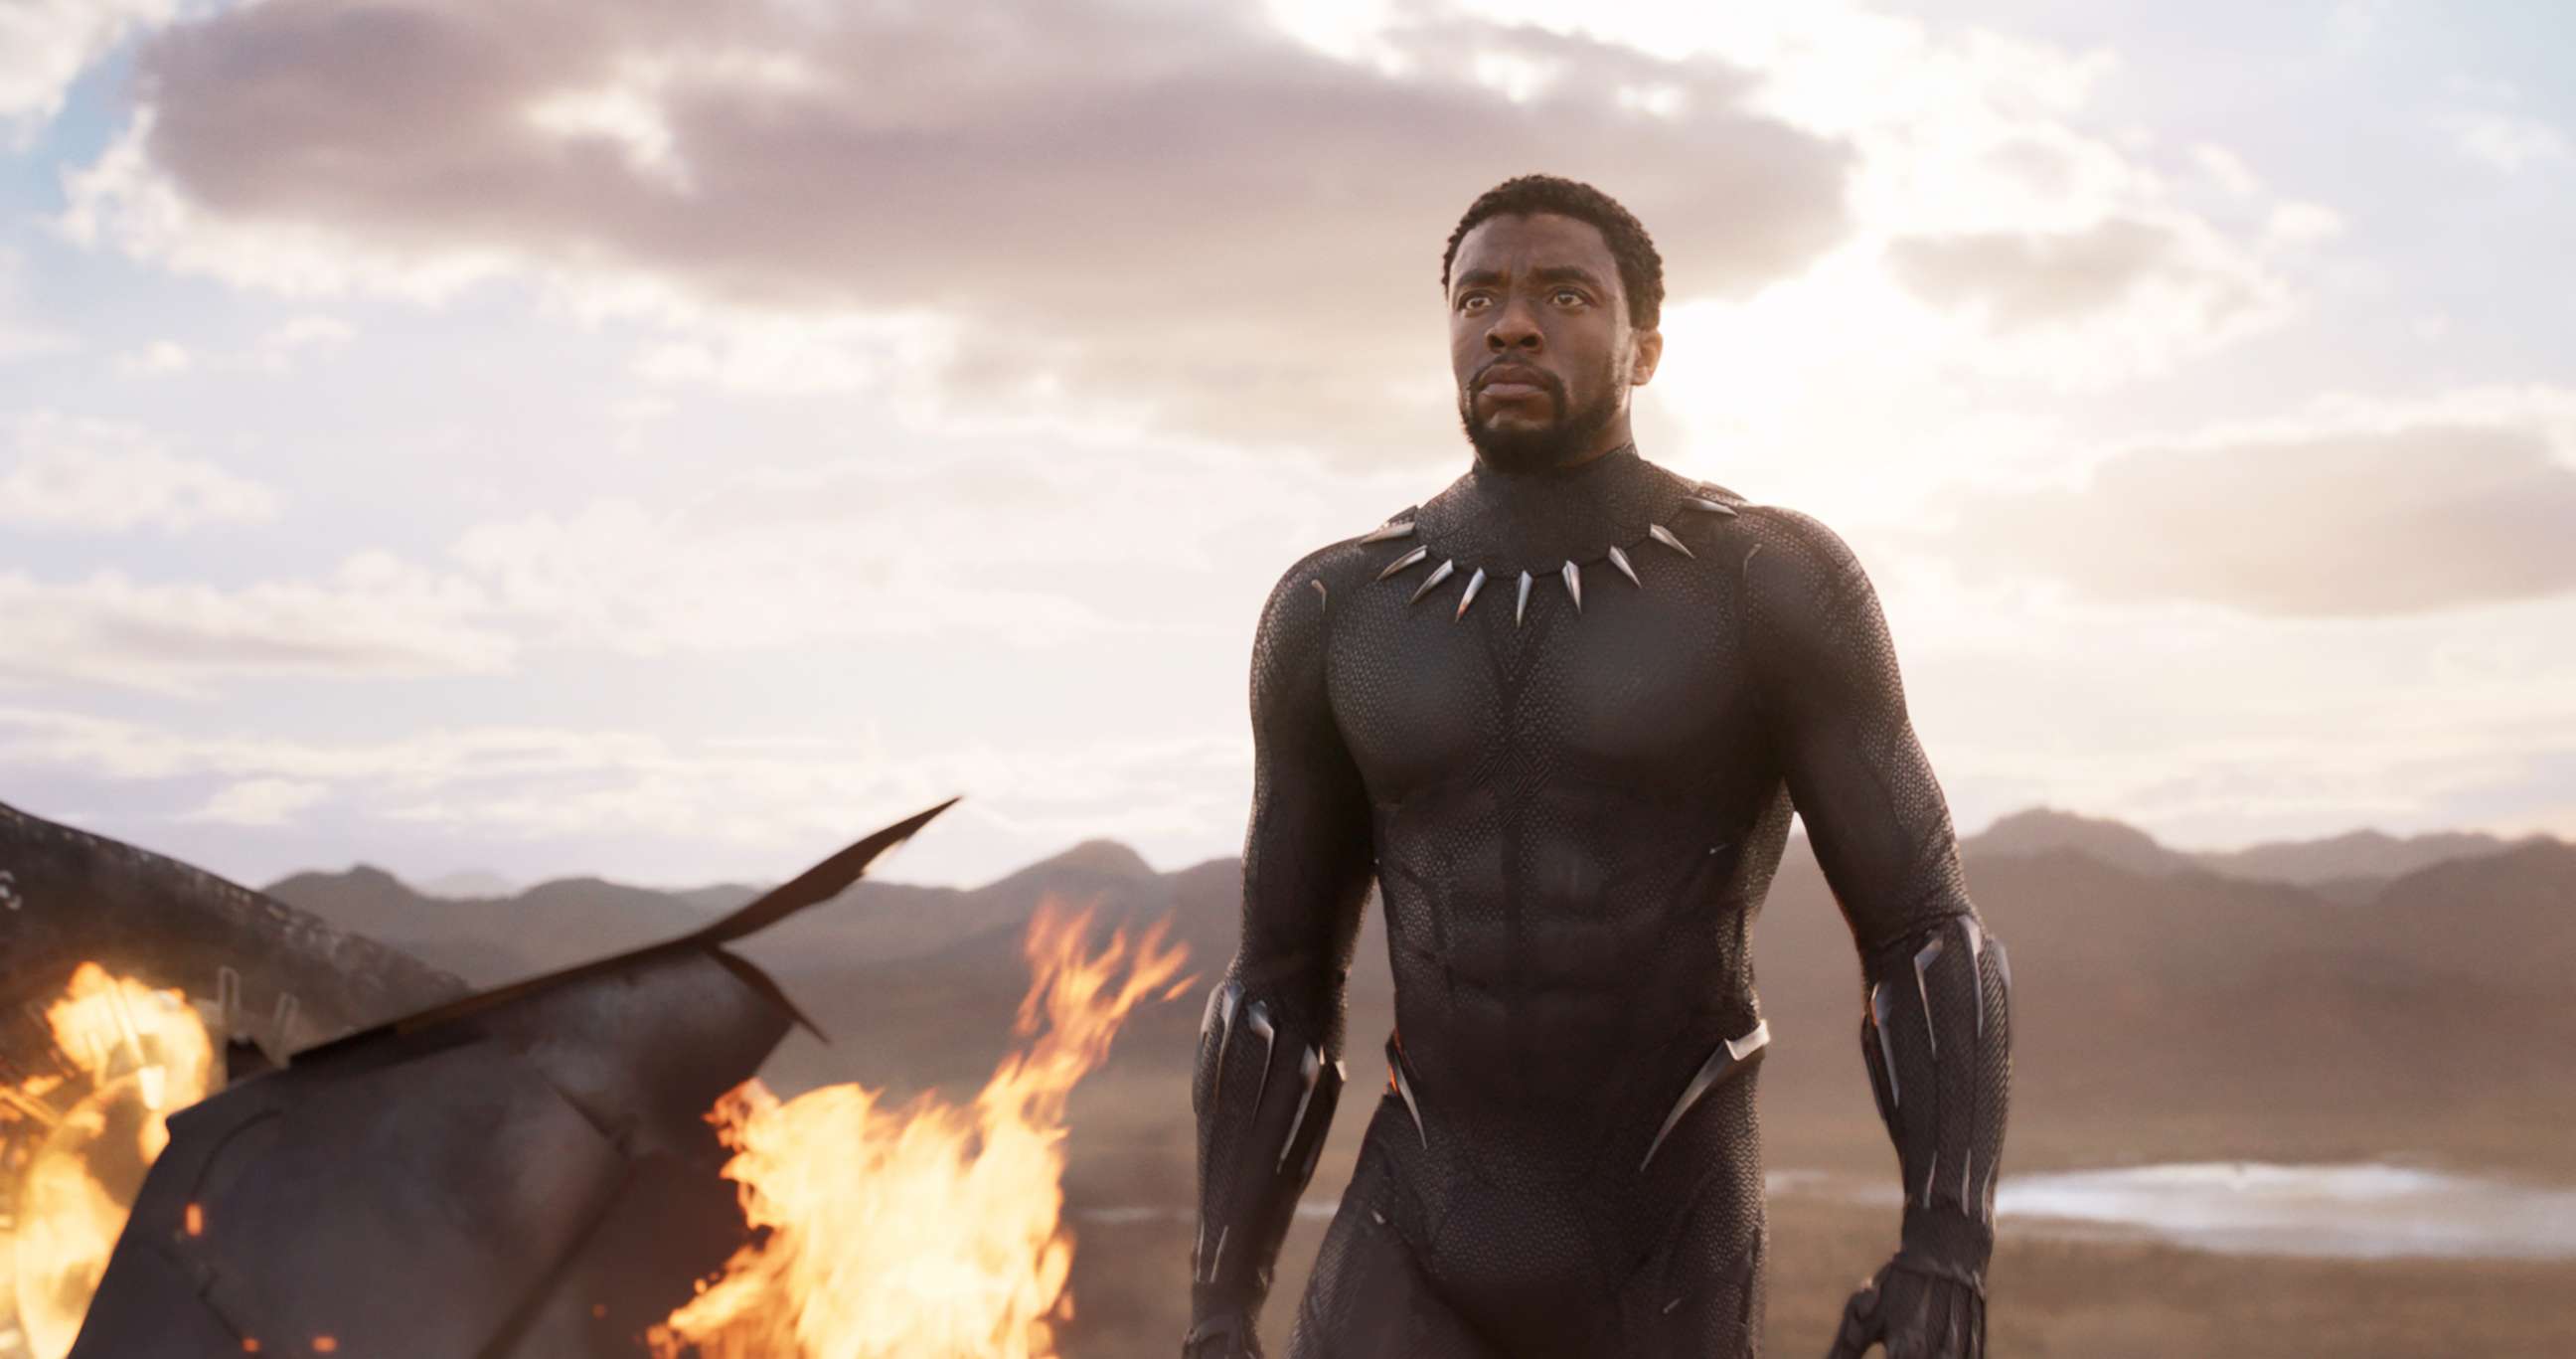 PHOTO: Chadwick Boseman in a scene from the movie Black Panther.